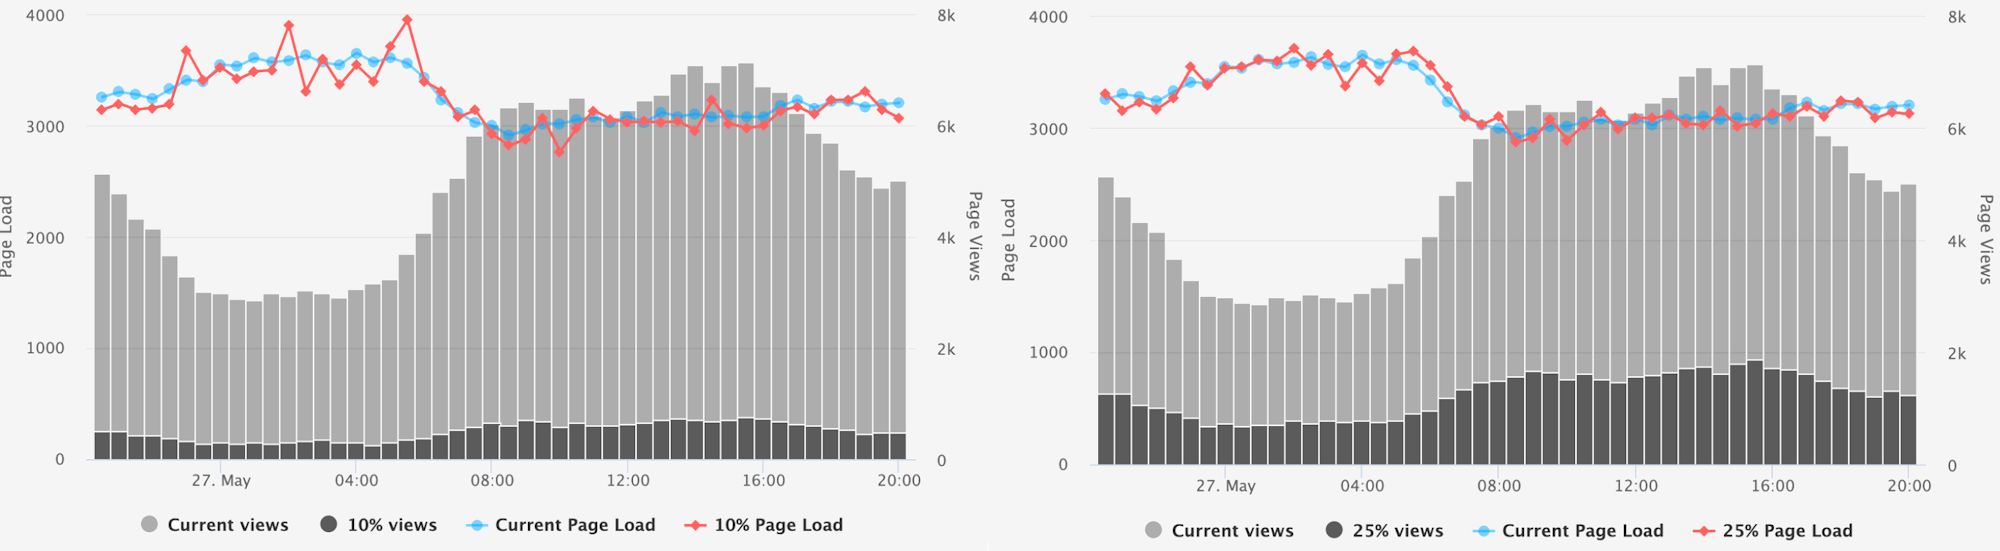 Side by side comparison of time series hourly data for a medium site.